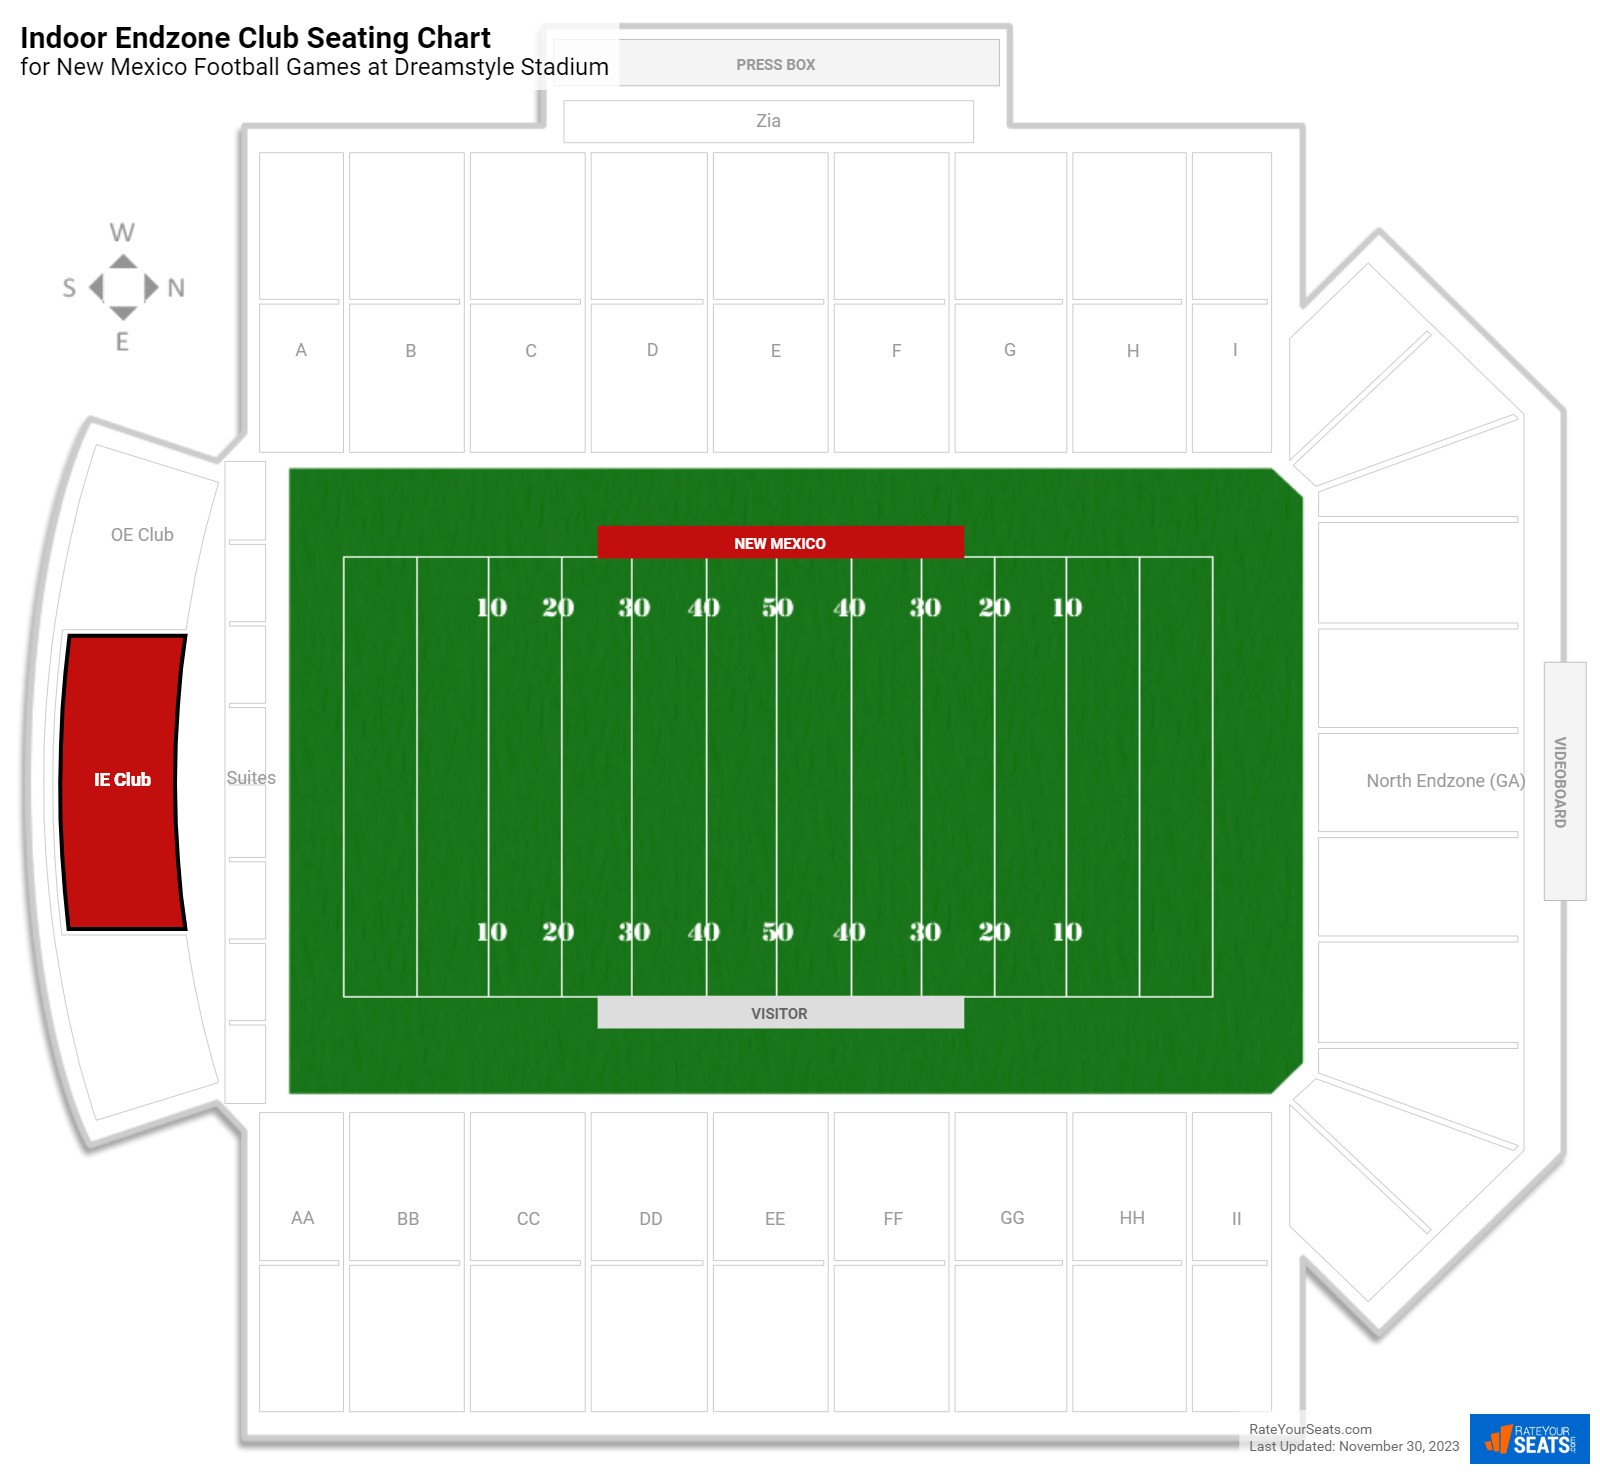 New Mexico Indoor Endzone Club Seating Chart at Dreamstyle Stadium